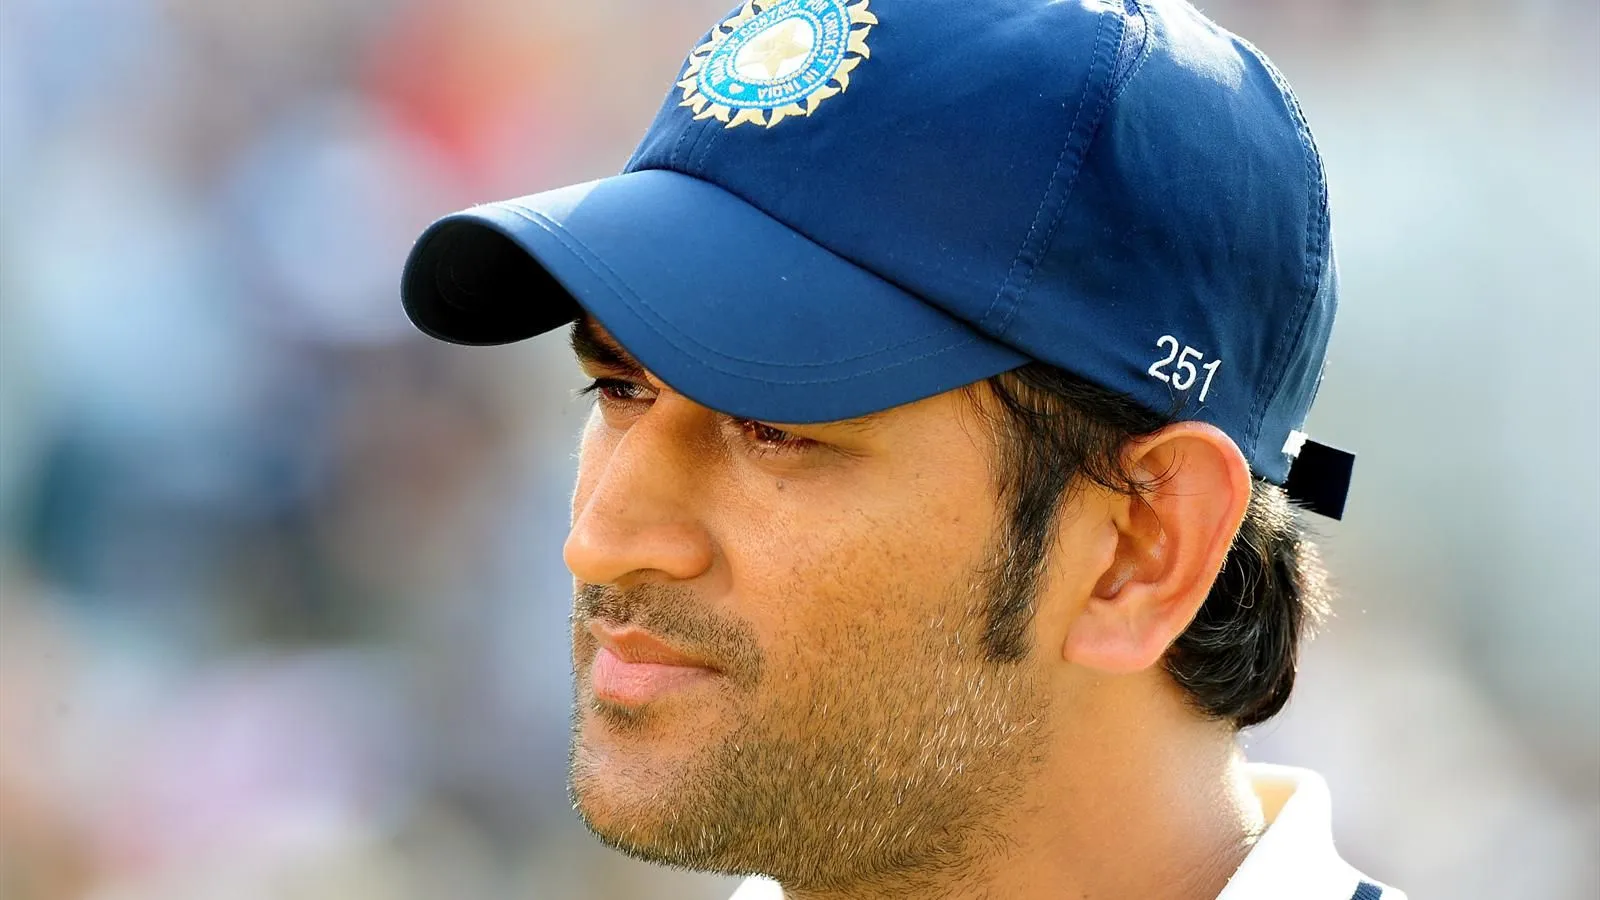 M.S Dhoni : Discuss About Dhoni’s Carrier And Achievements